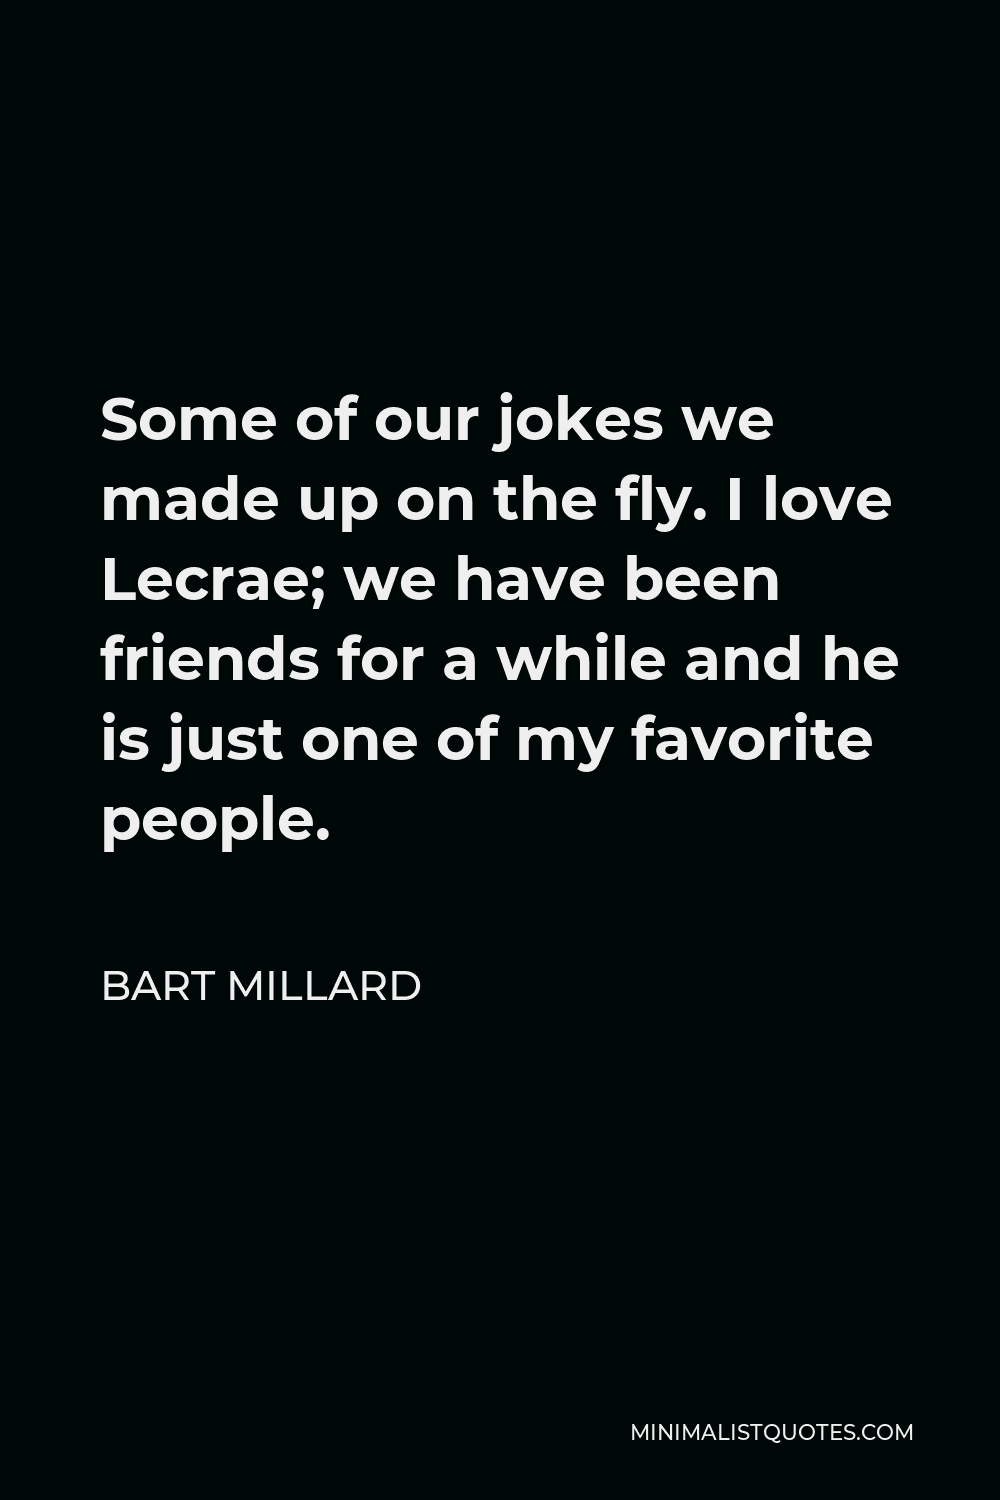 Bart Millard Quote - Some of our jokes we made up on the fly. I love Lecrae; we have been friends for a while and he is just one of my favorite people.